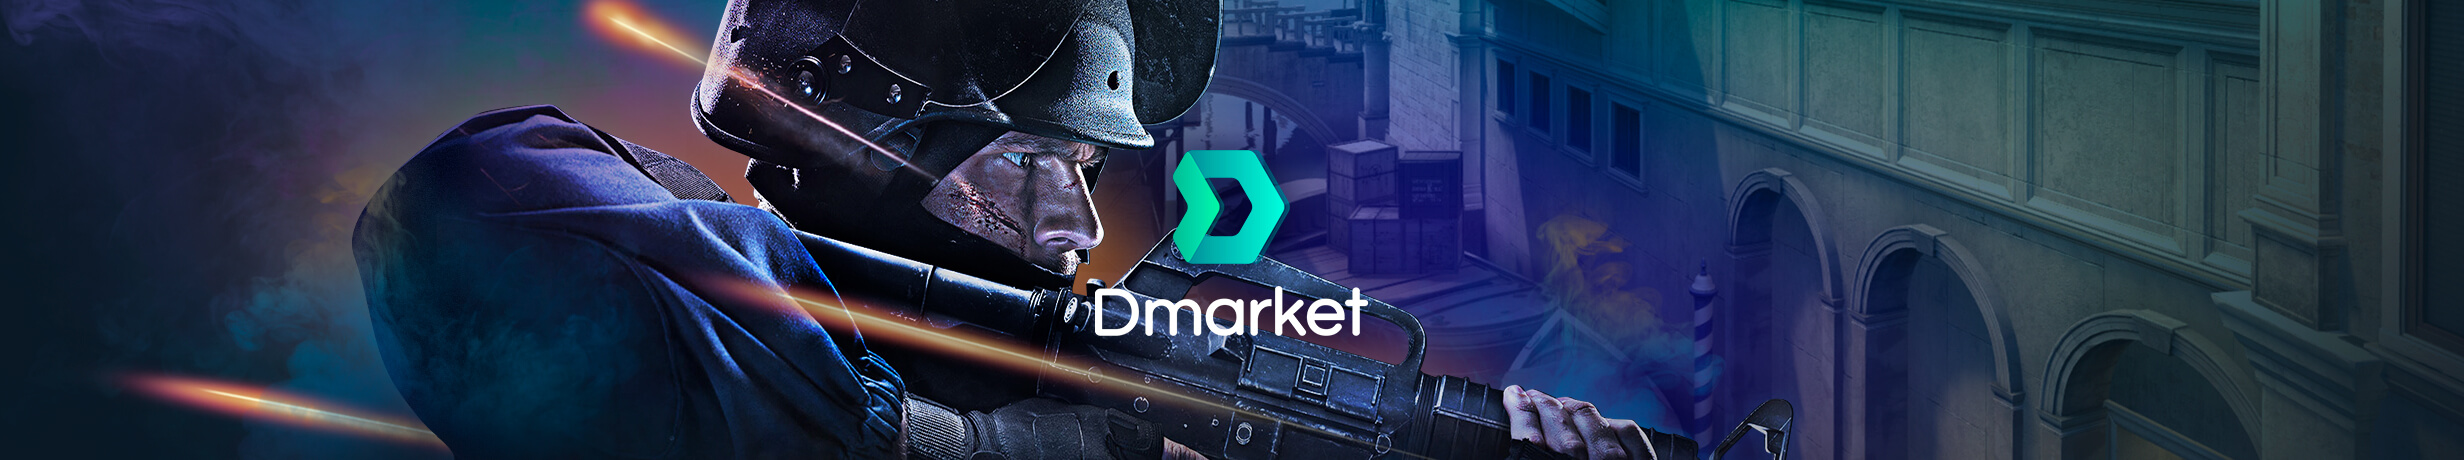 Key Features and Functionality of DMarket